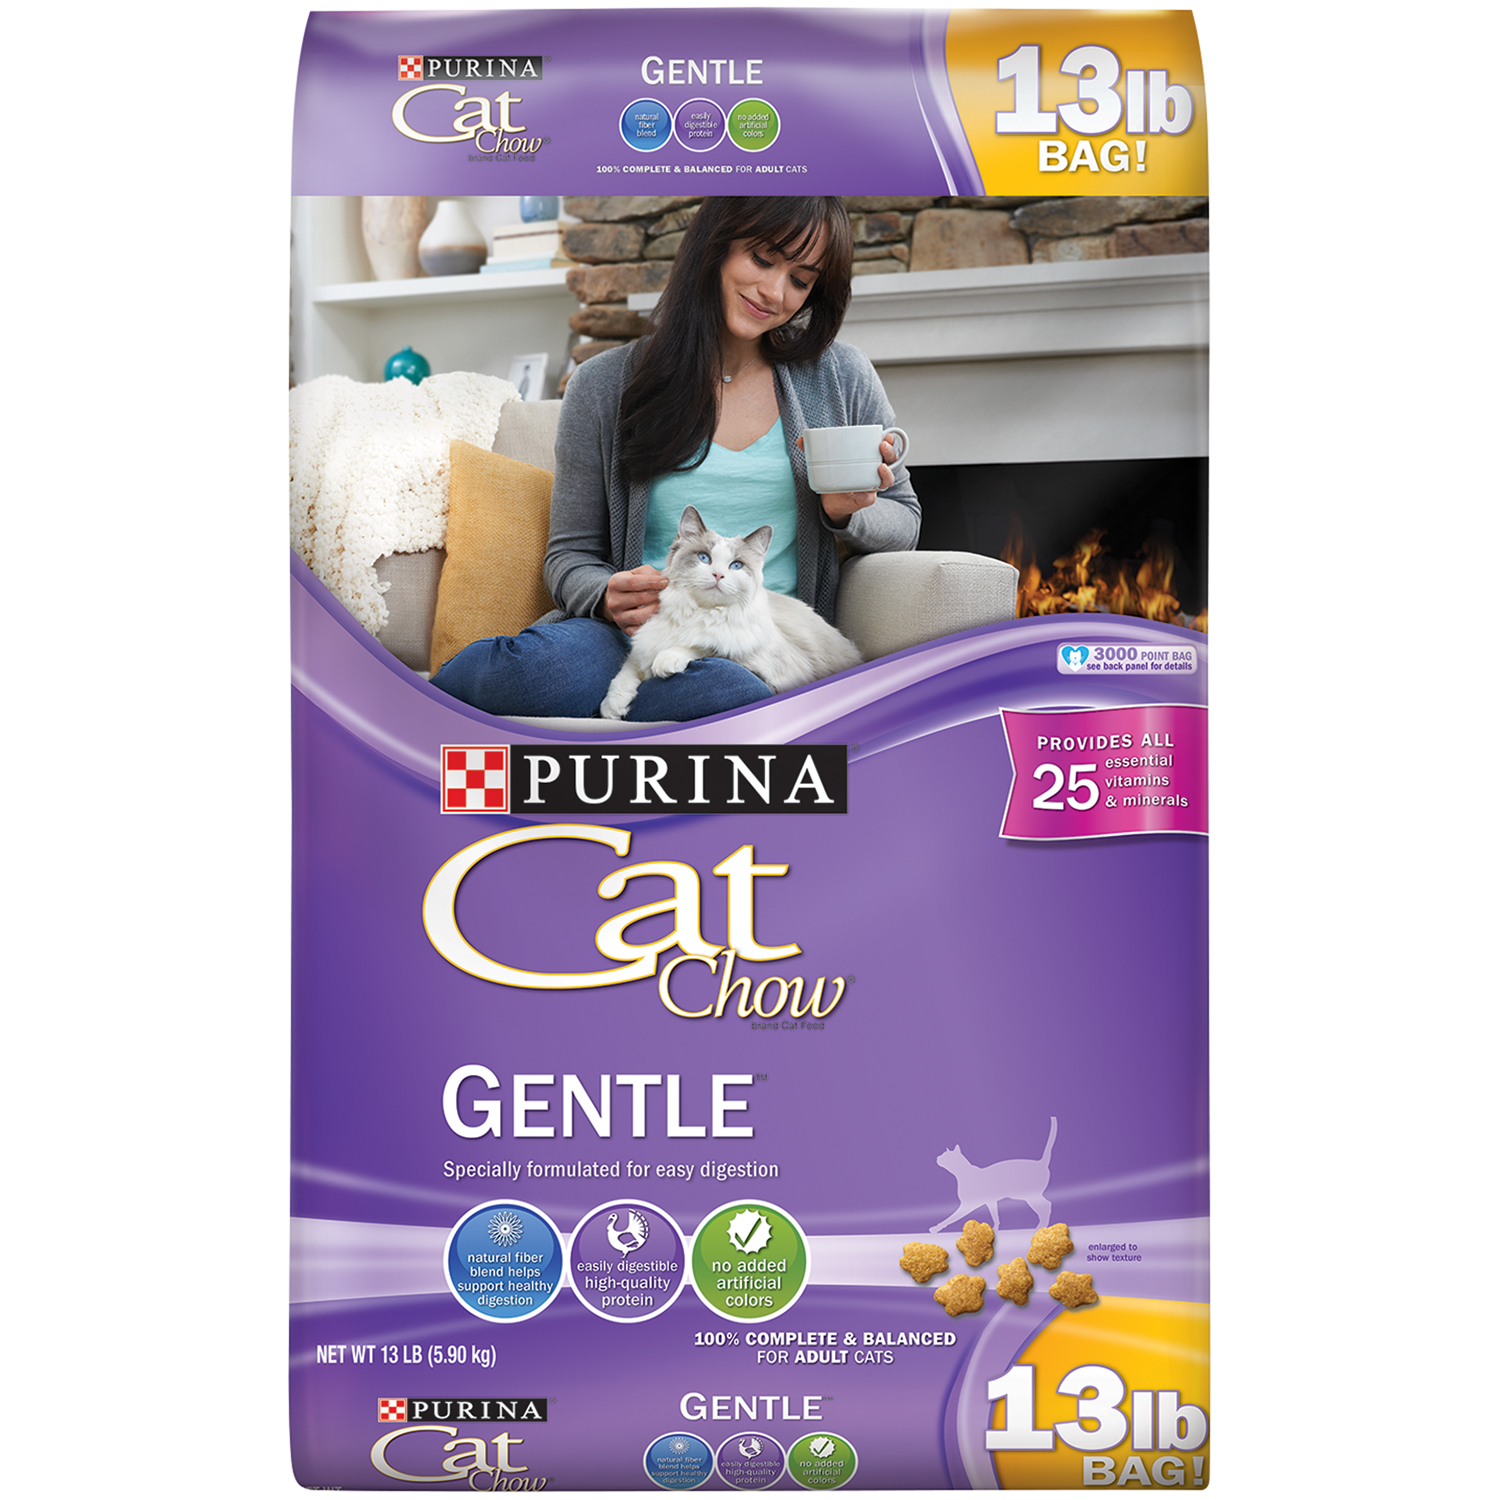 Purina Cat Chow Gentle Cat Food 13 lb Shop Your Way Online Shopping